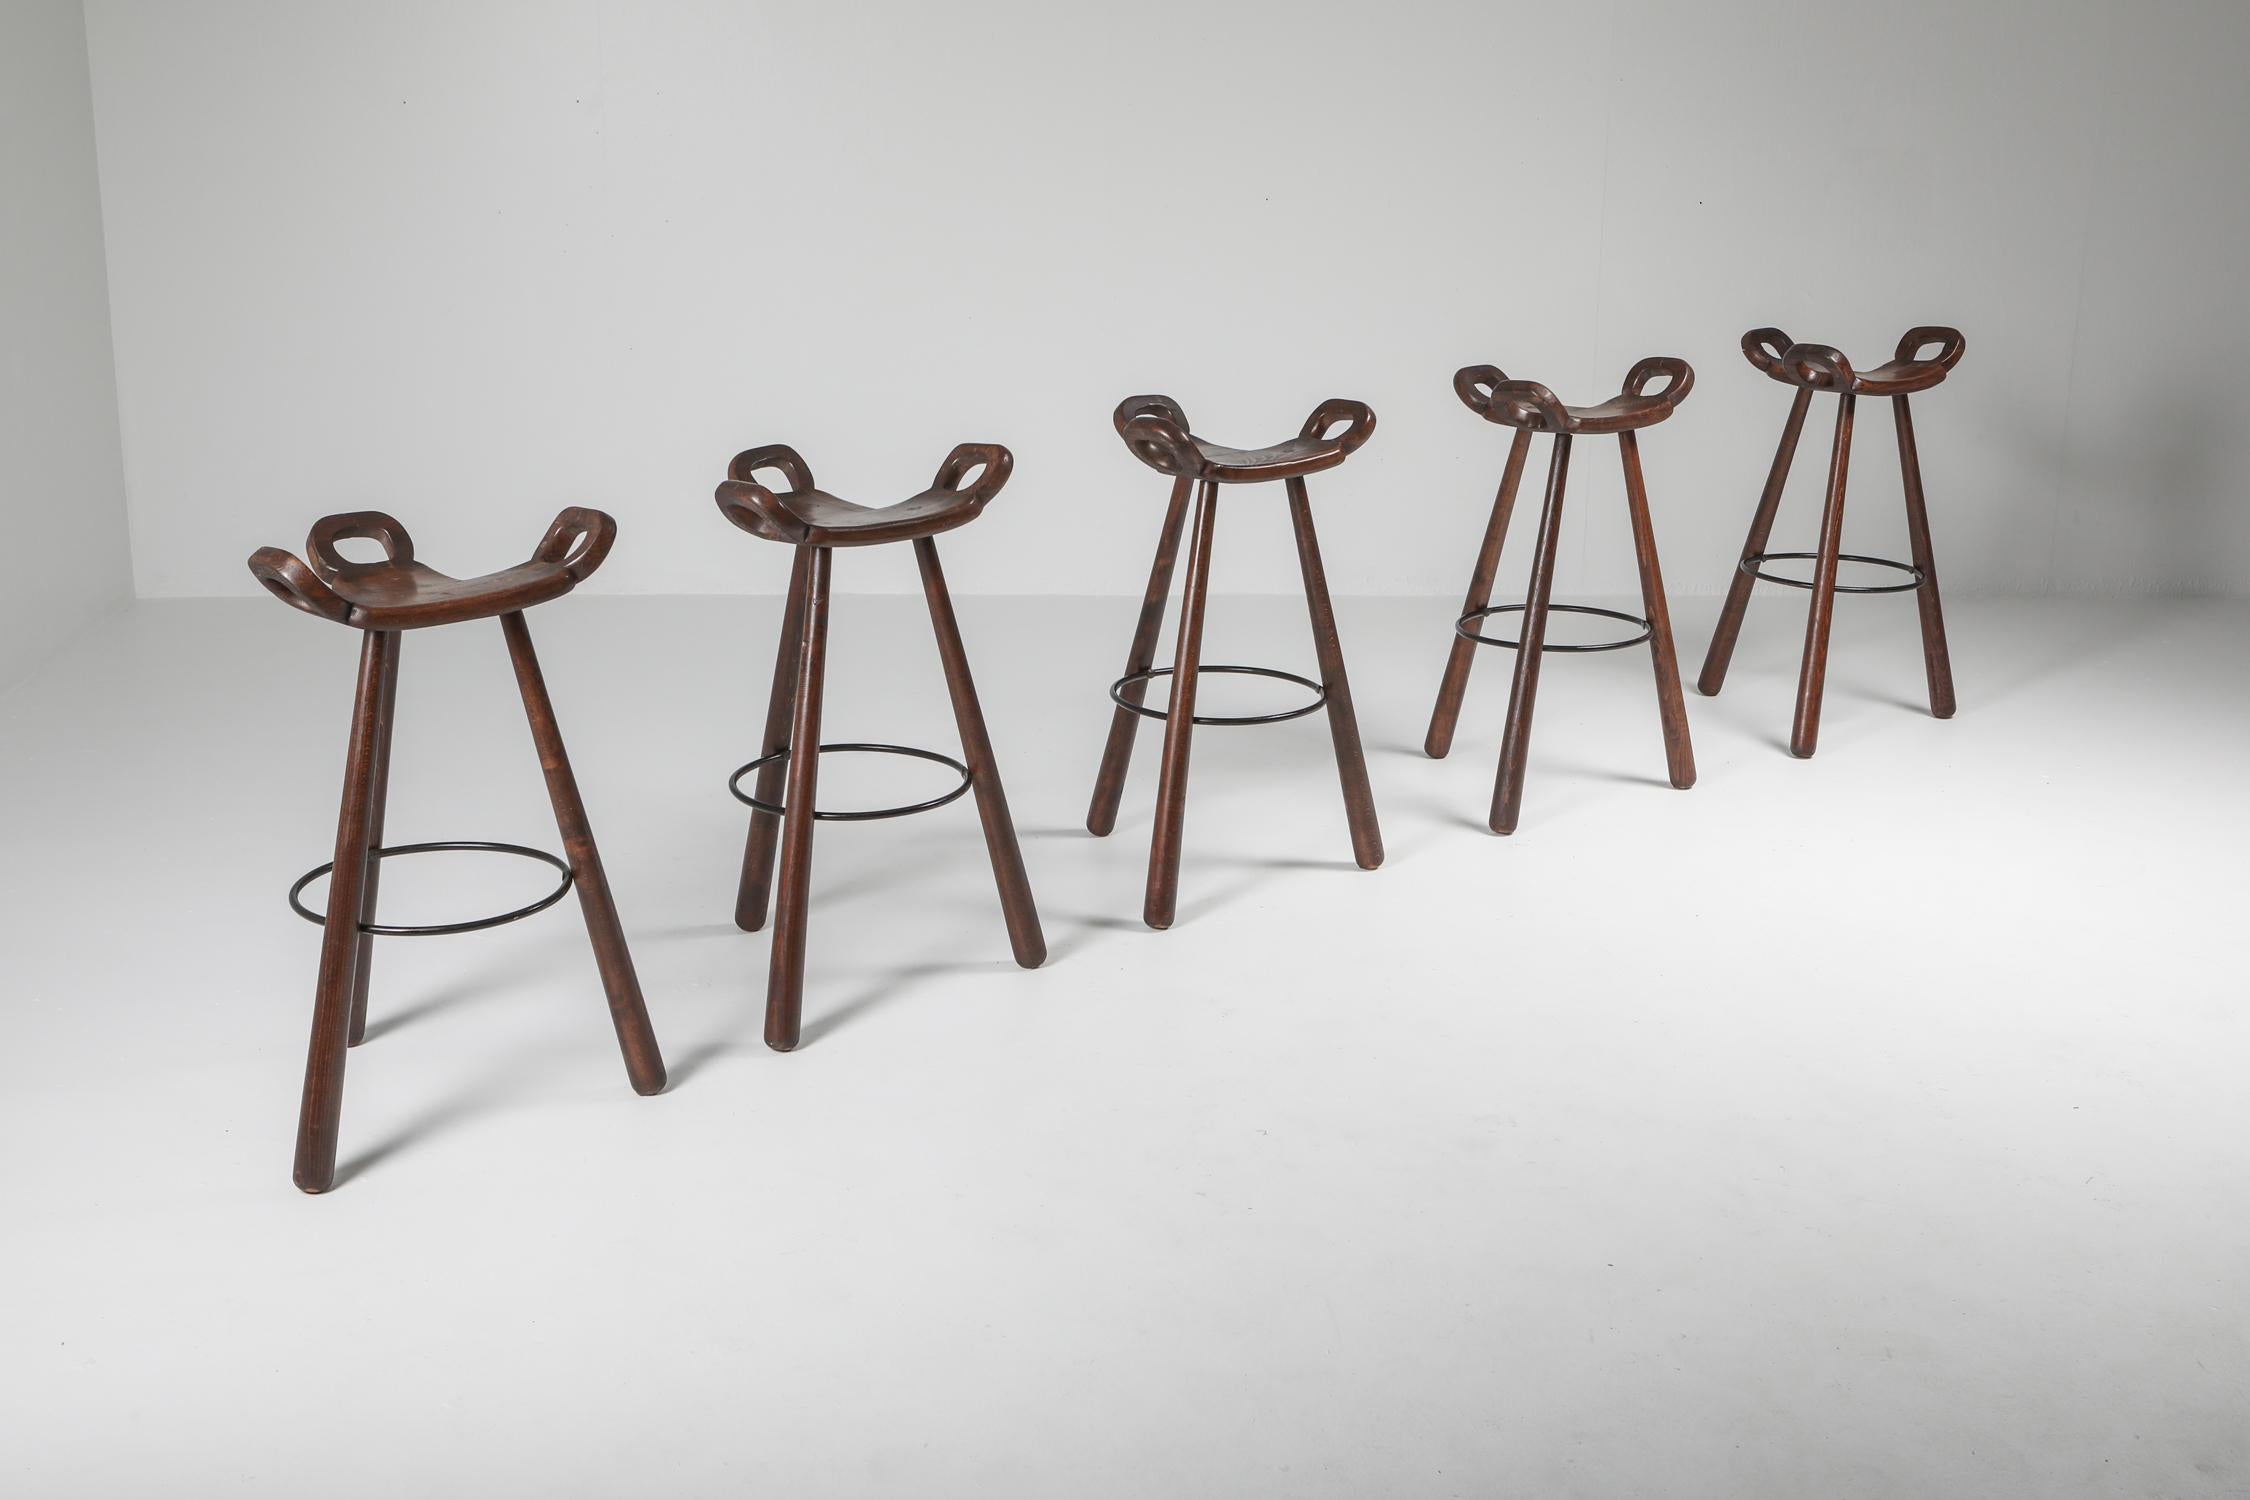 Scandinavian modern bar stools by Carl Malmsten, made in 1950s Sweden. Embodying the essence of mid-century aesthetics, these stools have a sturdy construction of solid beech wood, making them both durable and with a warm, inviting appearance.